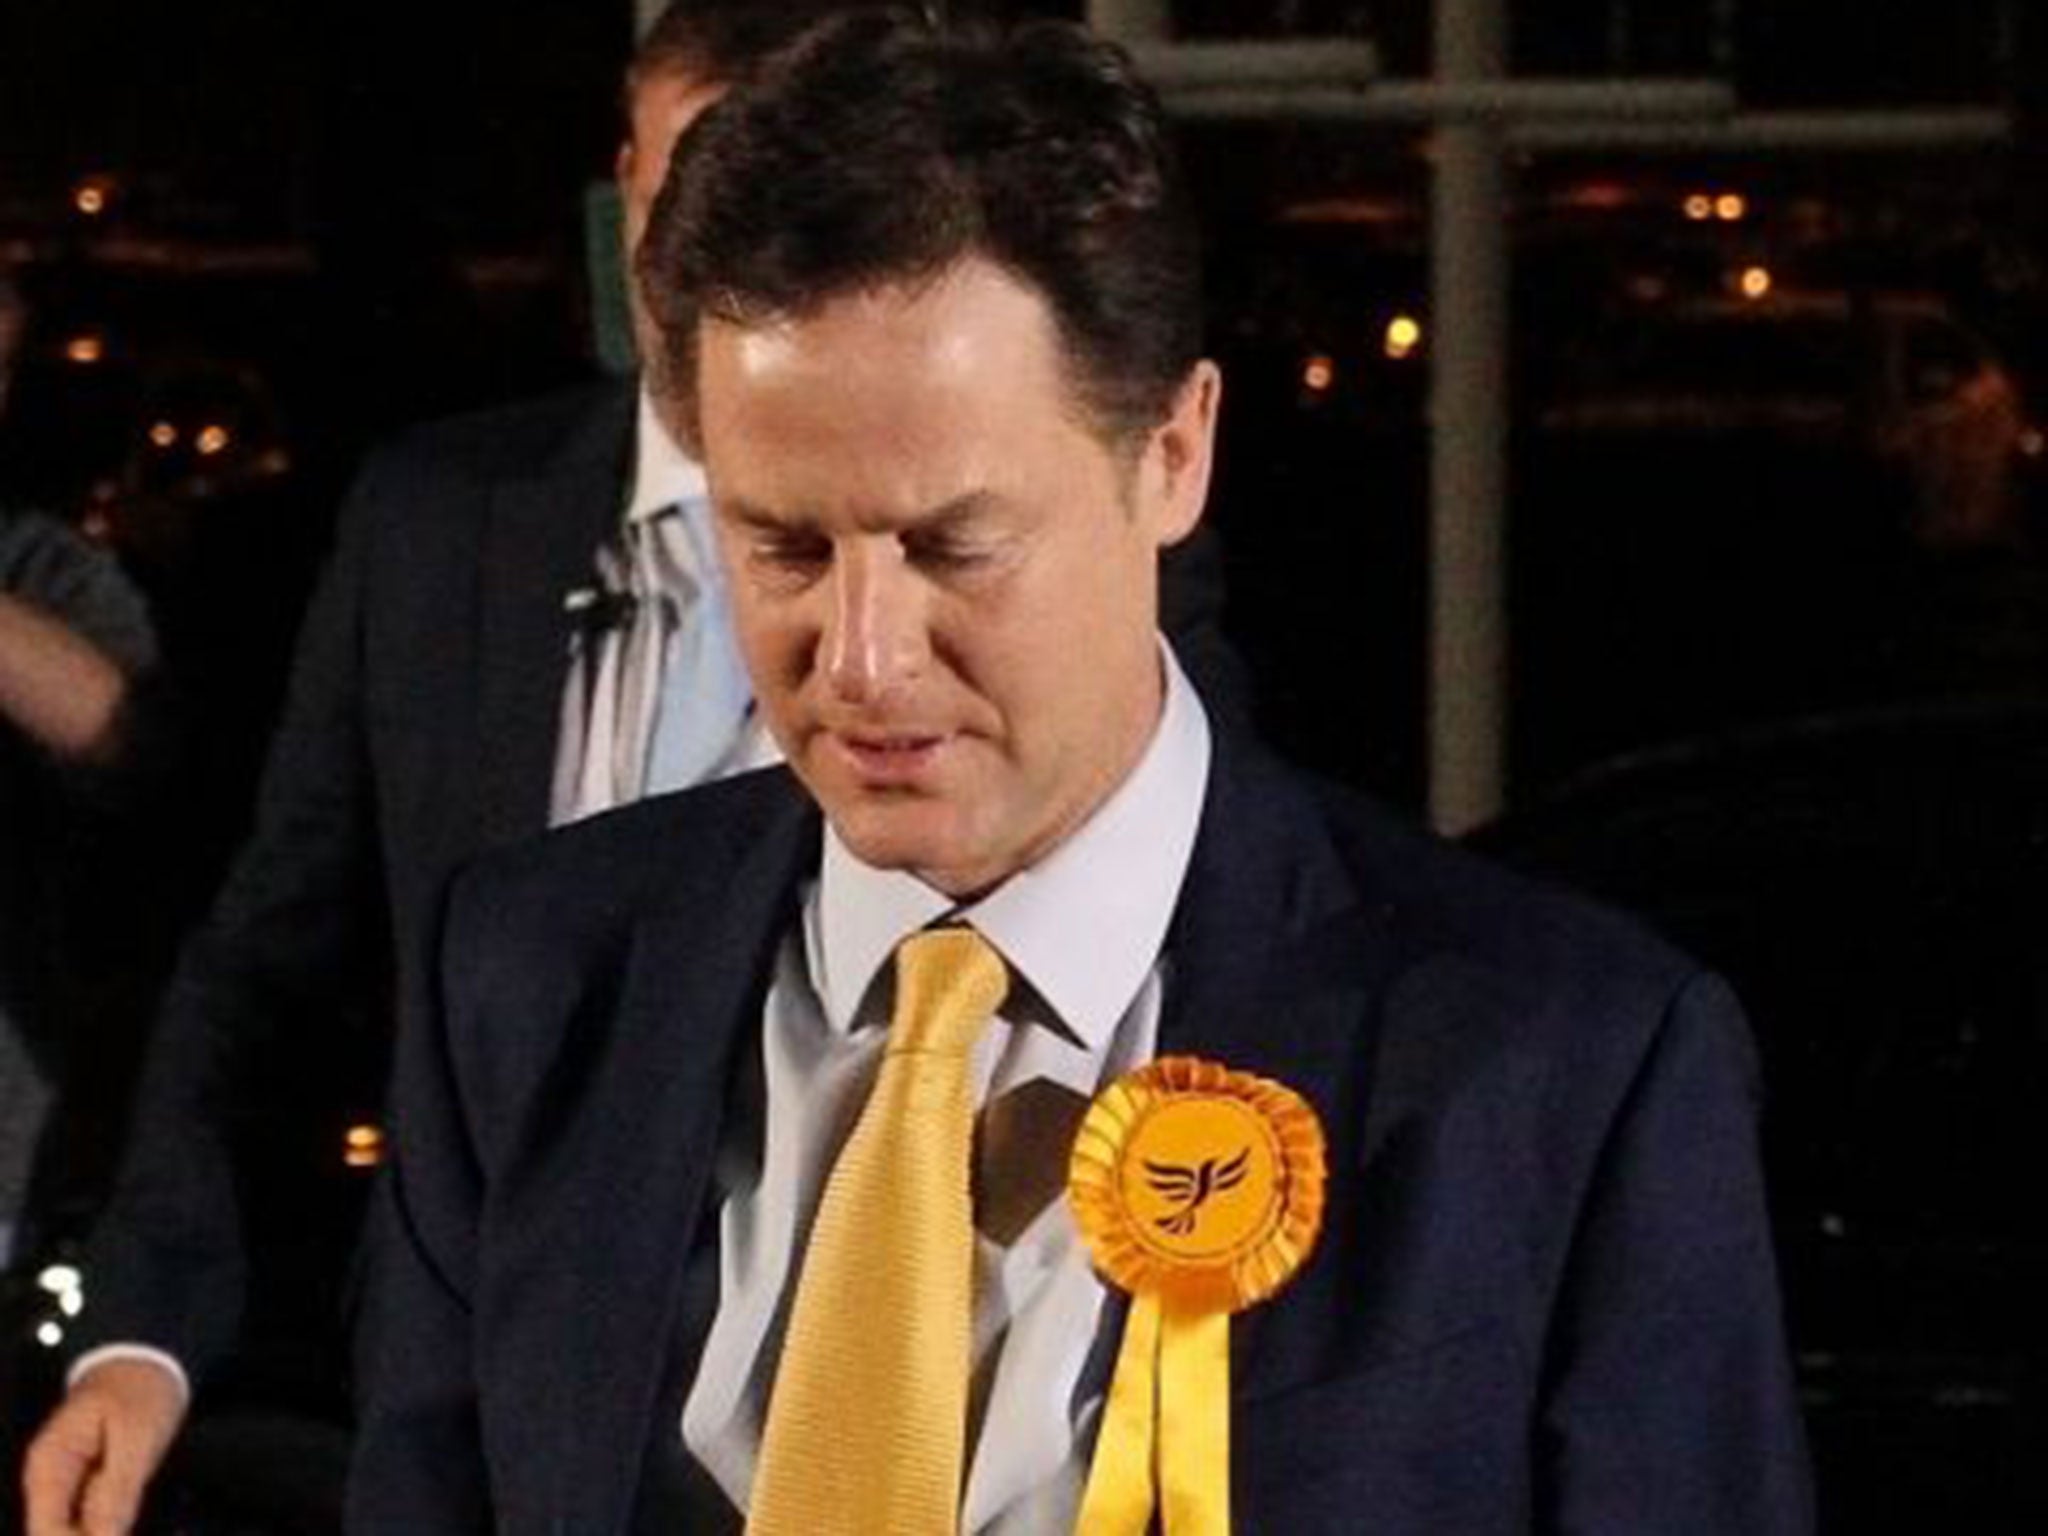 Nick Clegg resigned as leader of the Liberal Democrats after a disastrous night in the polls